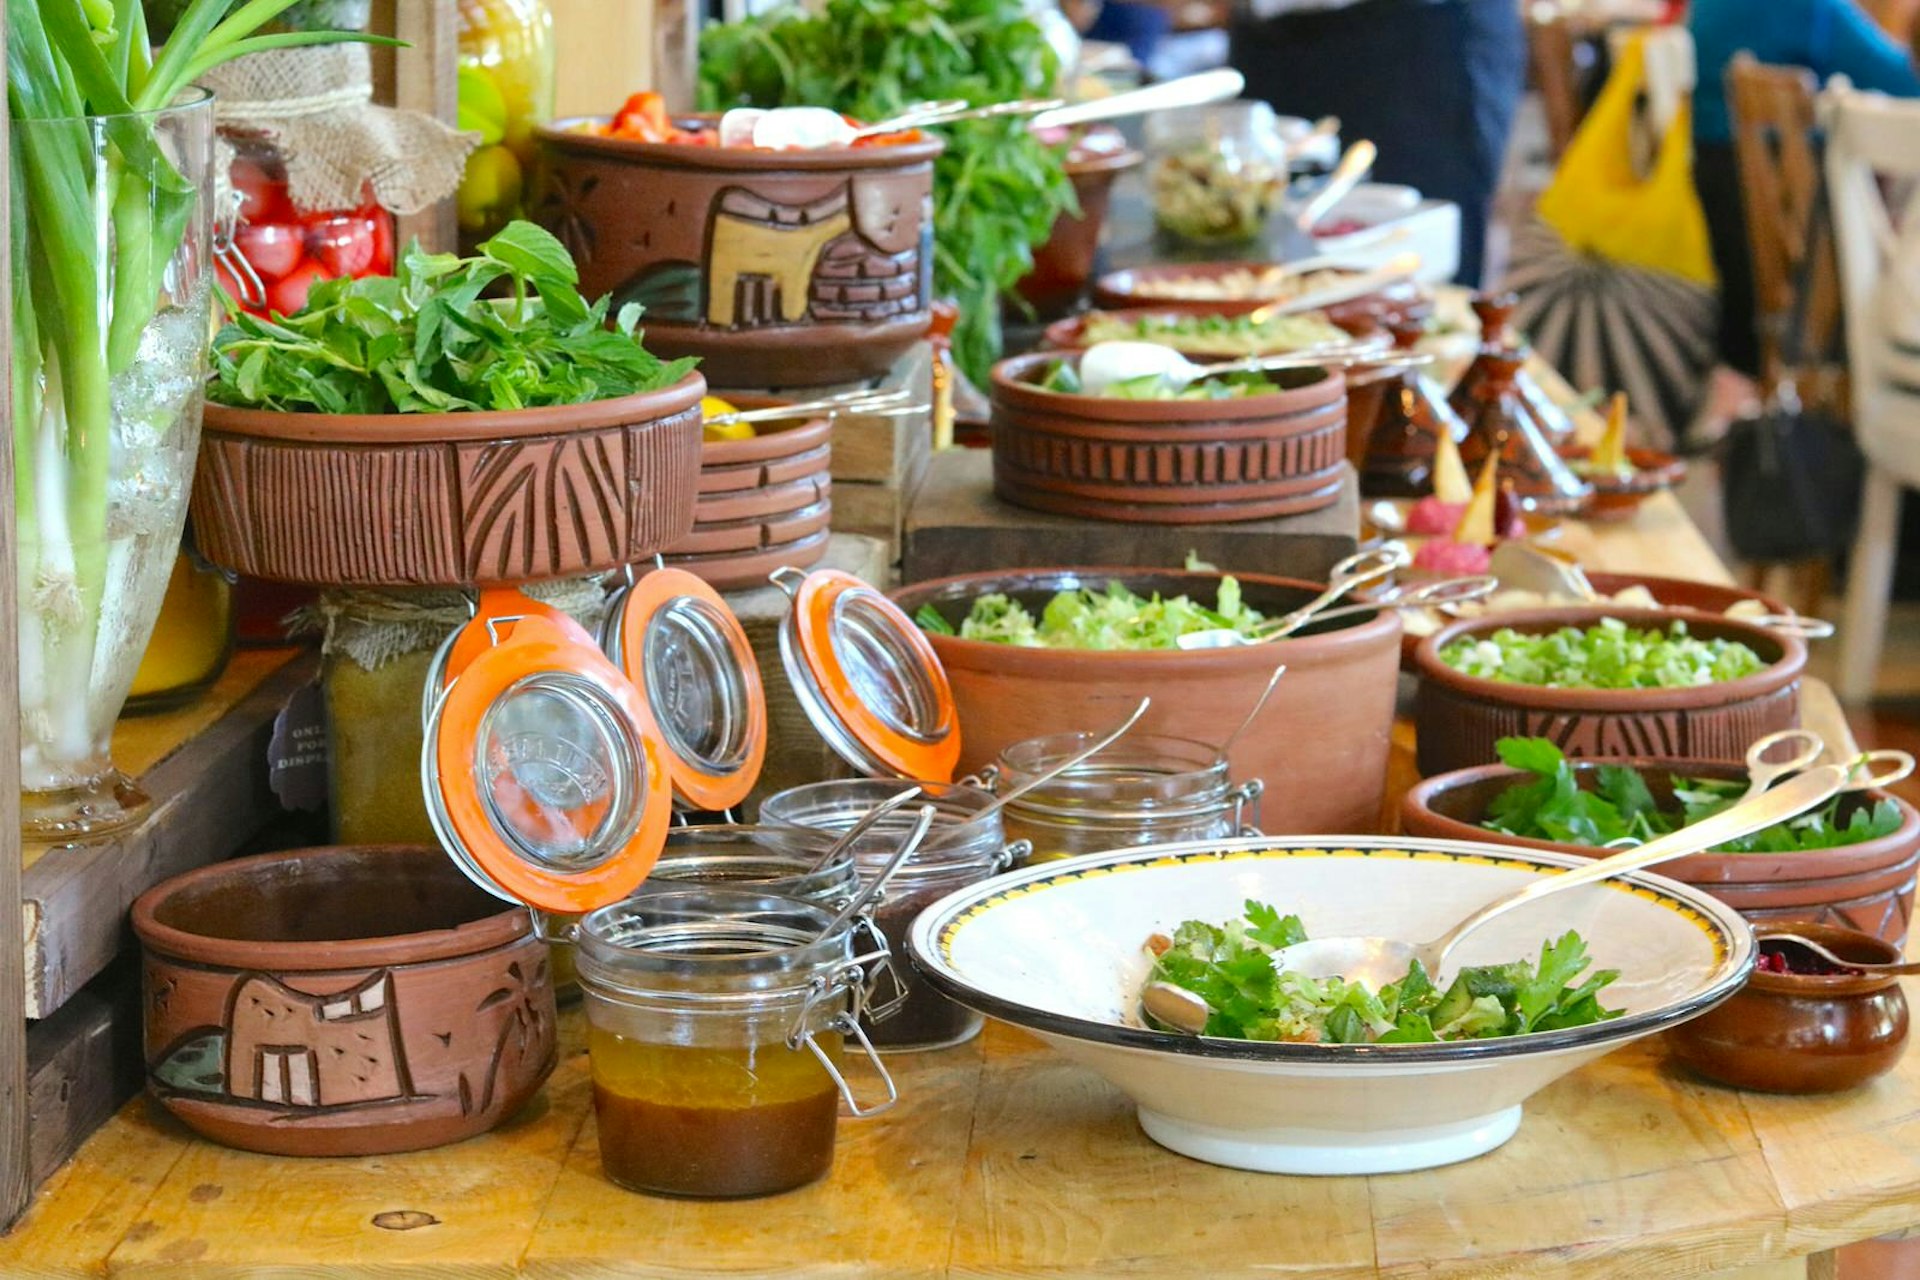 Farmer's Brunch table at the Ritz-Carlton Doha. Image by Polly Byles / Lonely Planet